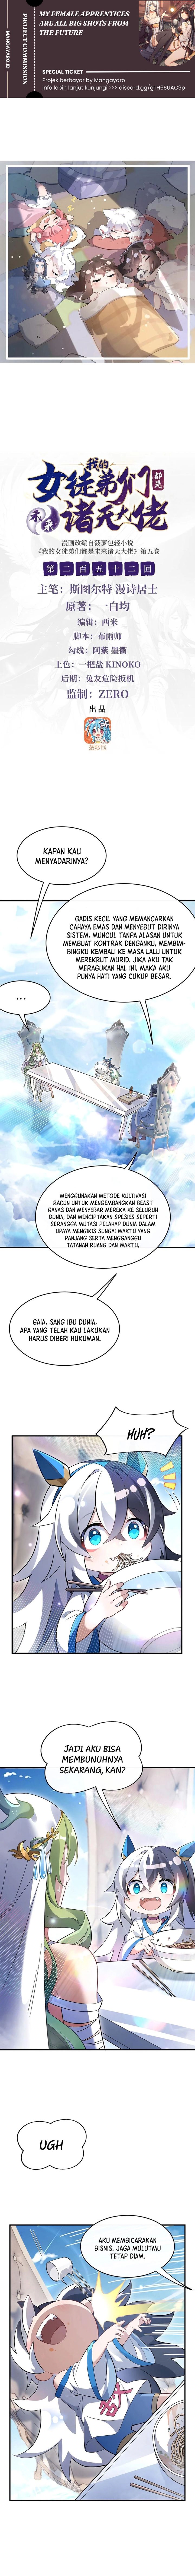 Dilarang COPAS - situs resmi www.mangacanblog.com - Komik my female apprentices are all big shots from the future 252 - chapter 252 253 Indonesia my female apprentices are all big shots from the future 252 - chapter 252 Terbaru 0|Baca Manga Komik Indonesia|Mangacan